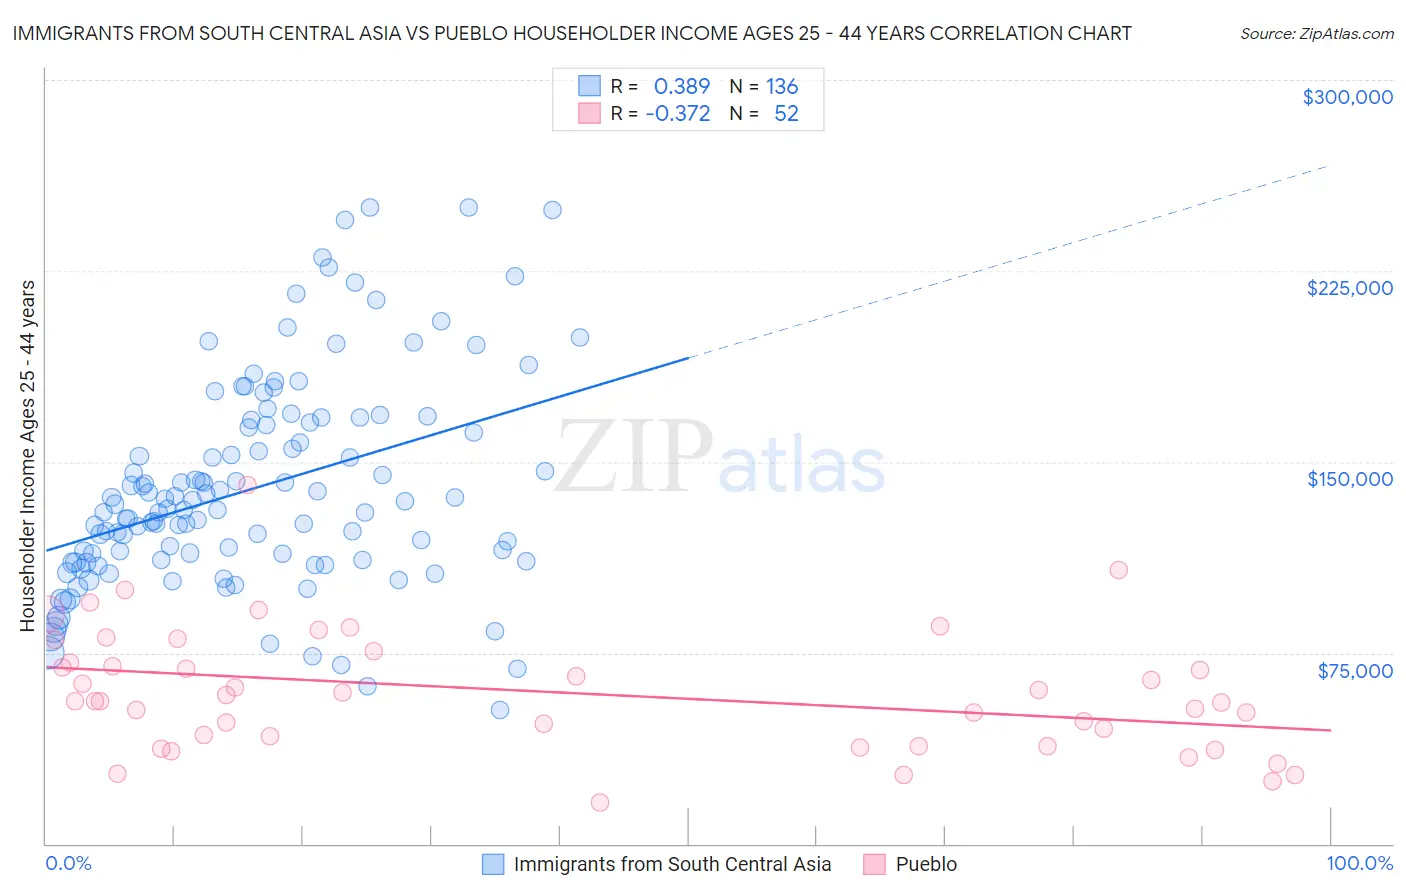 Immigrants from South Central Asia vs Pueblo Householder Income Ages 25 - 44 years